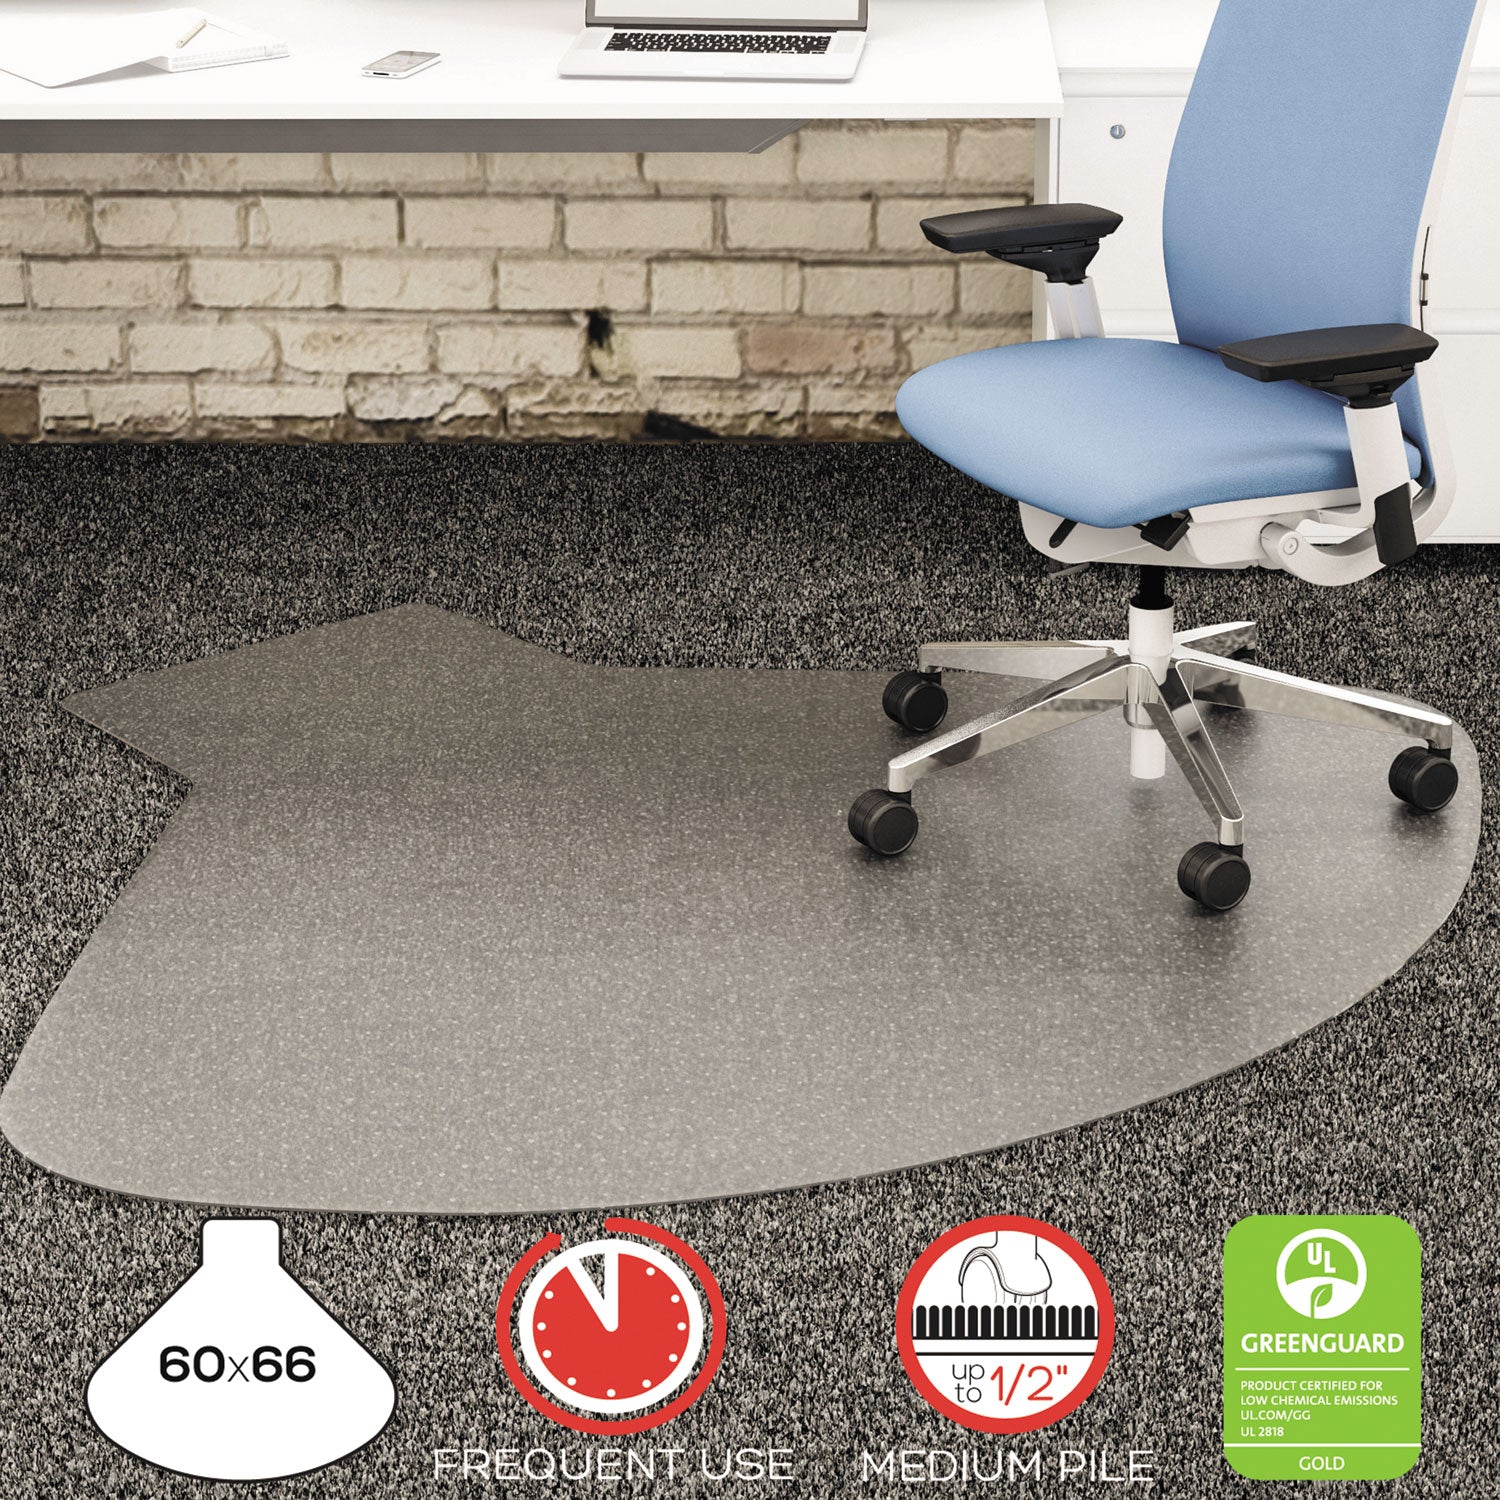 SuperMat Frequent Use Chair Mat, Medium Pile Carpet, 60 x 66, Workstation, Clear - 